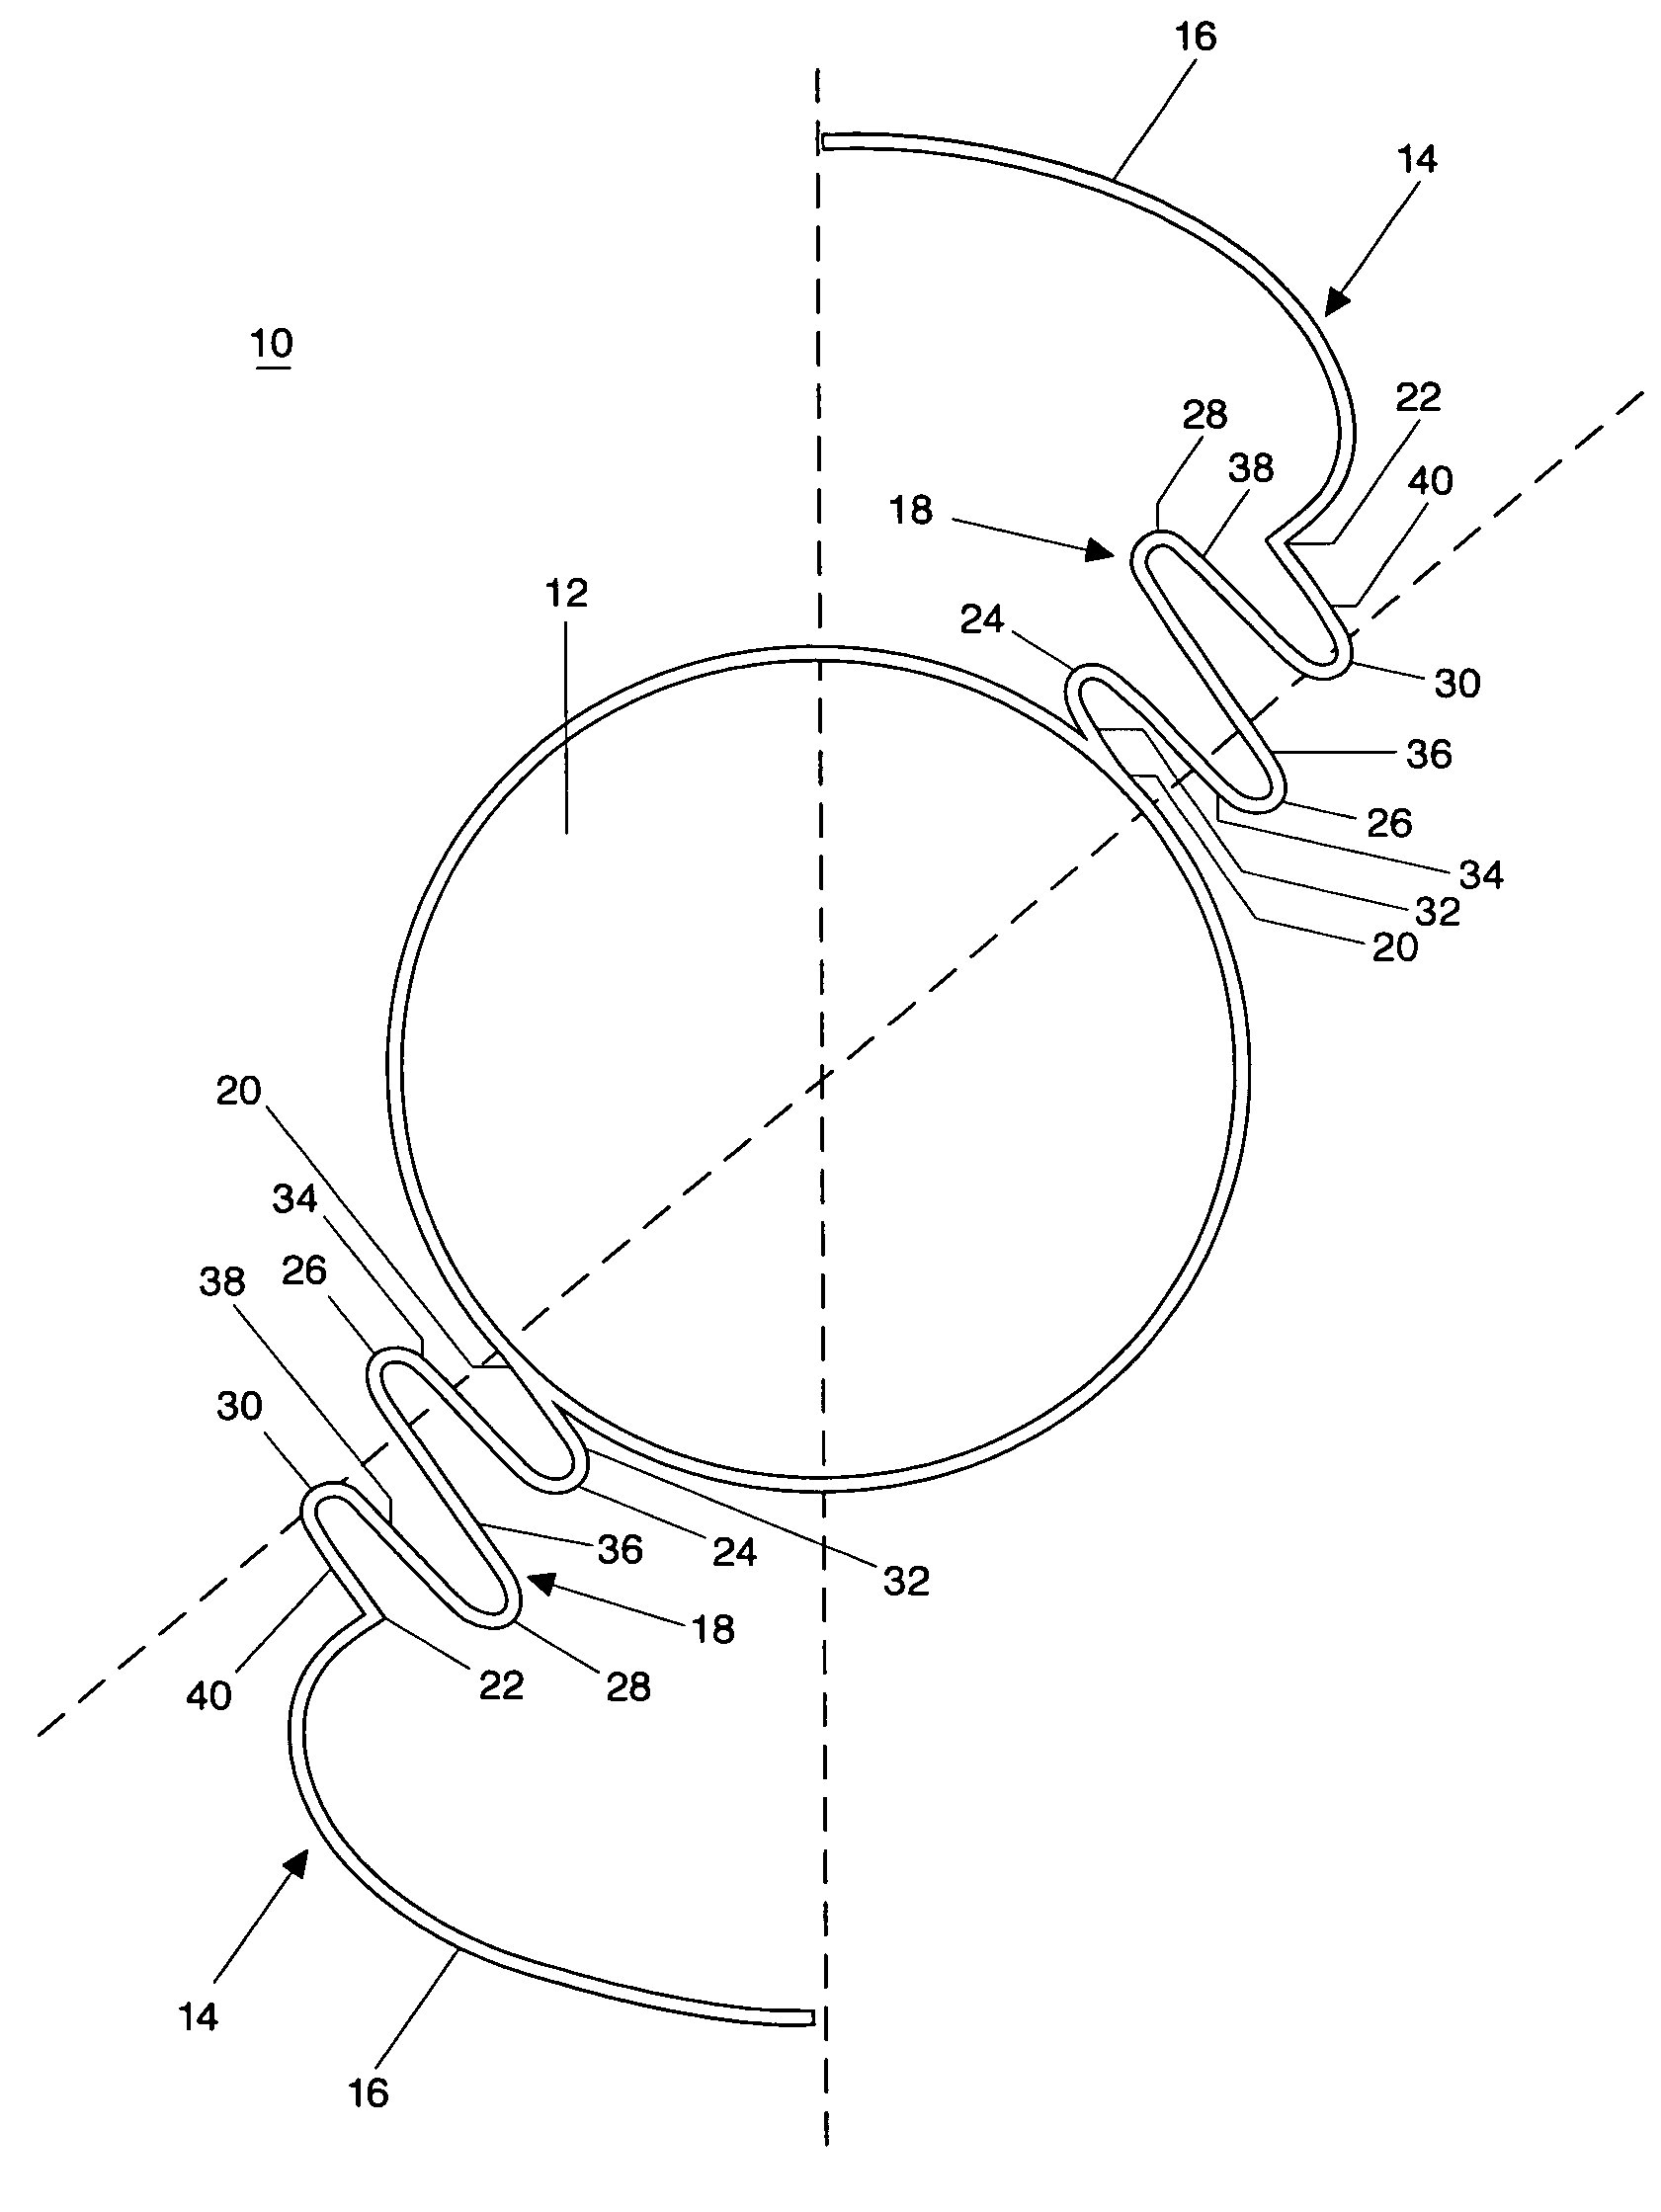 Accommodating intraocular lens implant